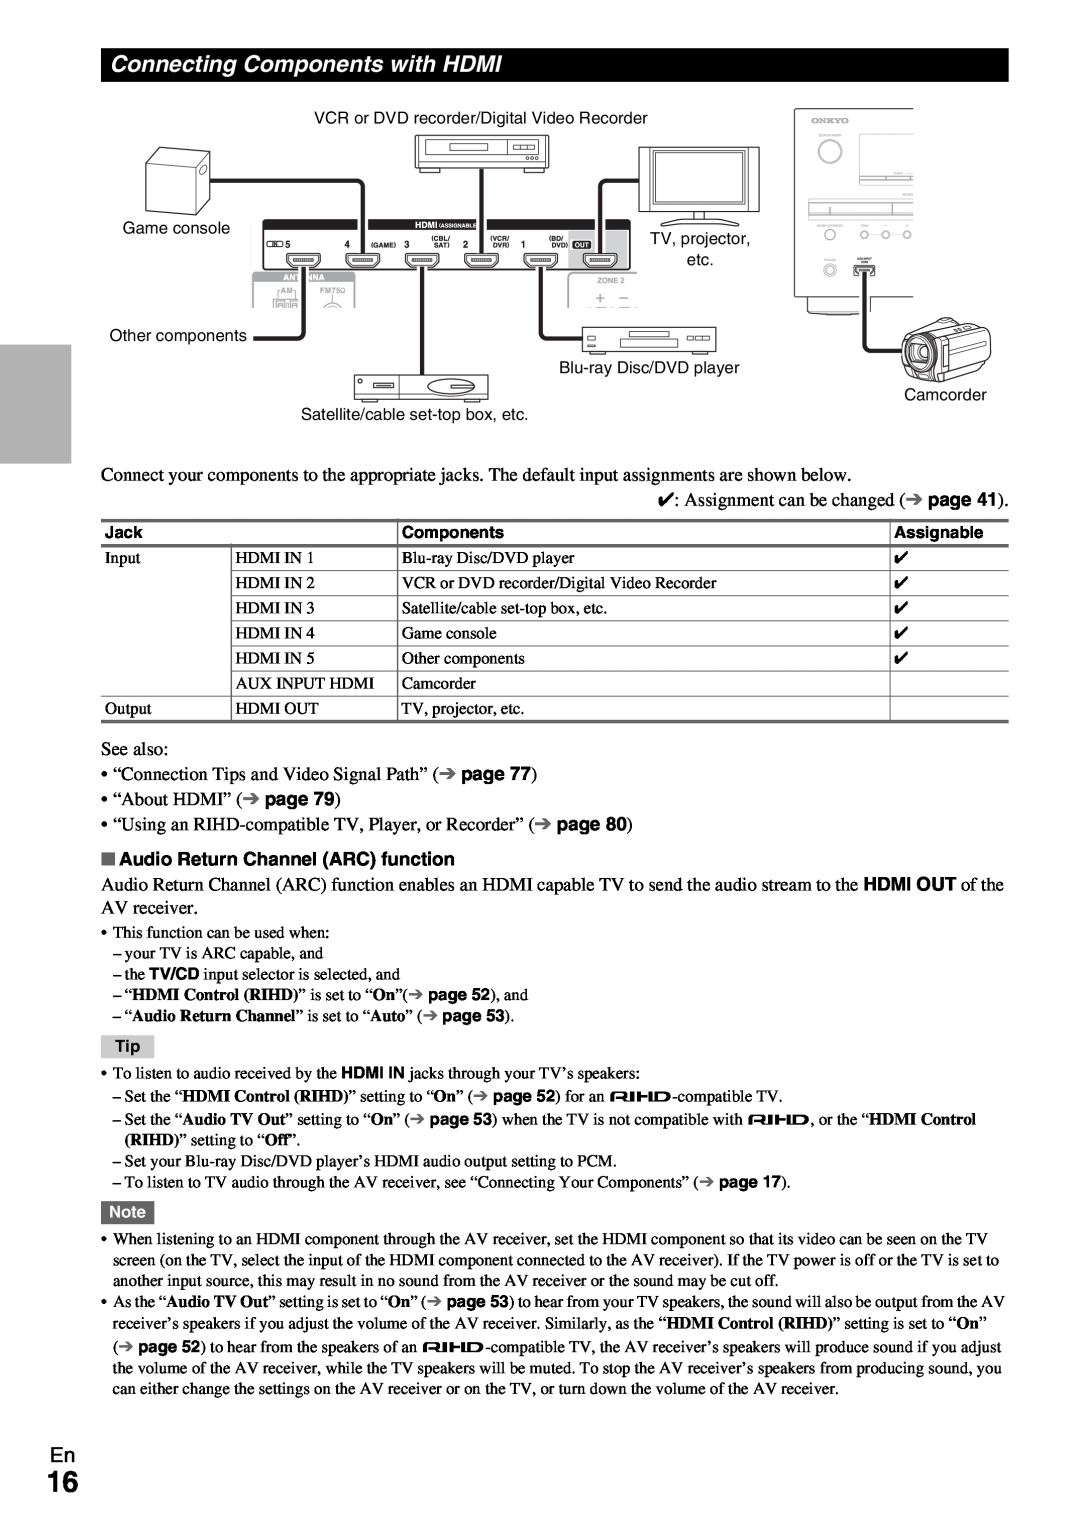 Onkyo HT-RC360 instruction manual Connecting Components with HDMI, Audio Return Channel ARC function 